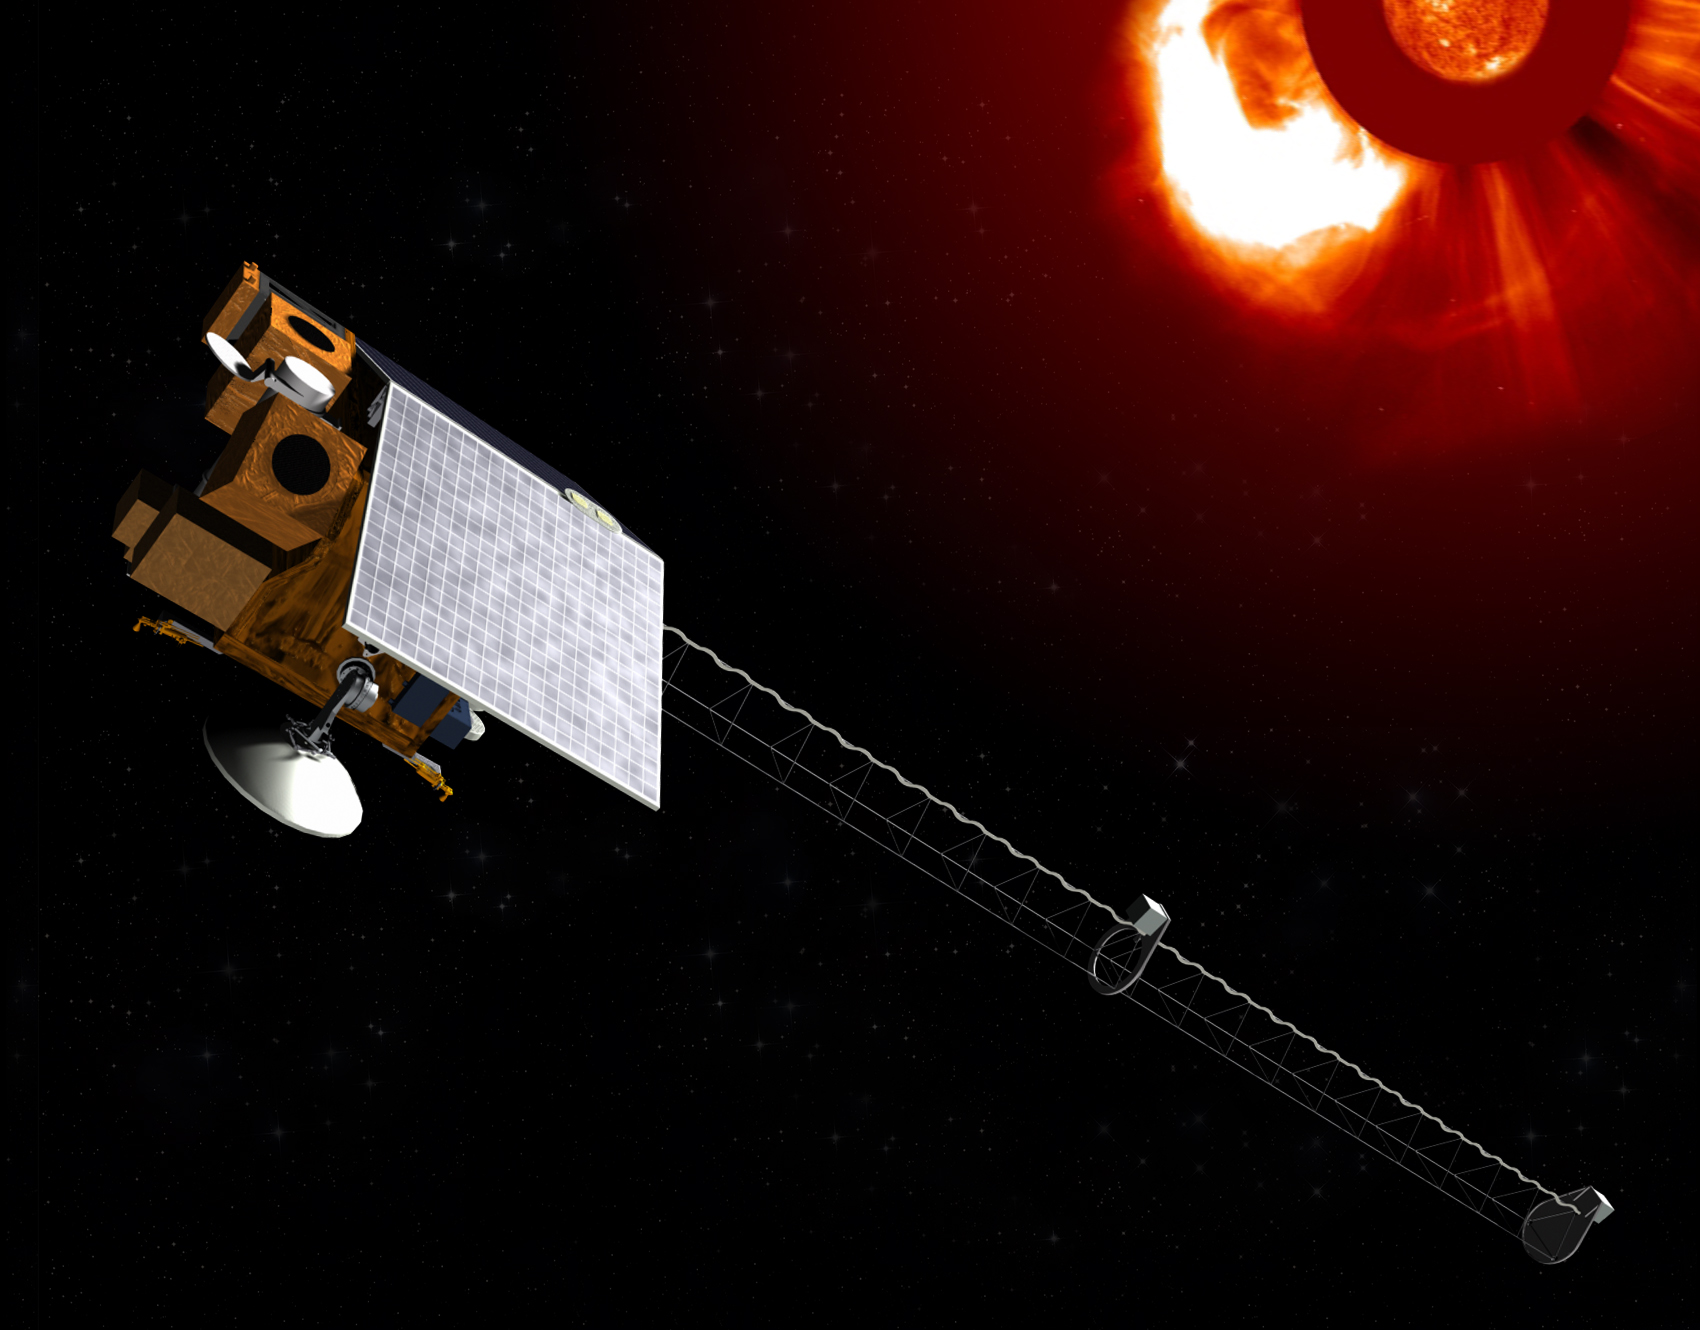 A rendering of a Ball Aerospace weather satellite